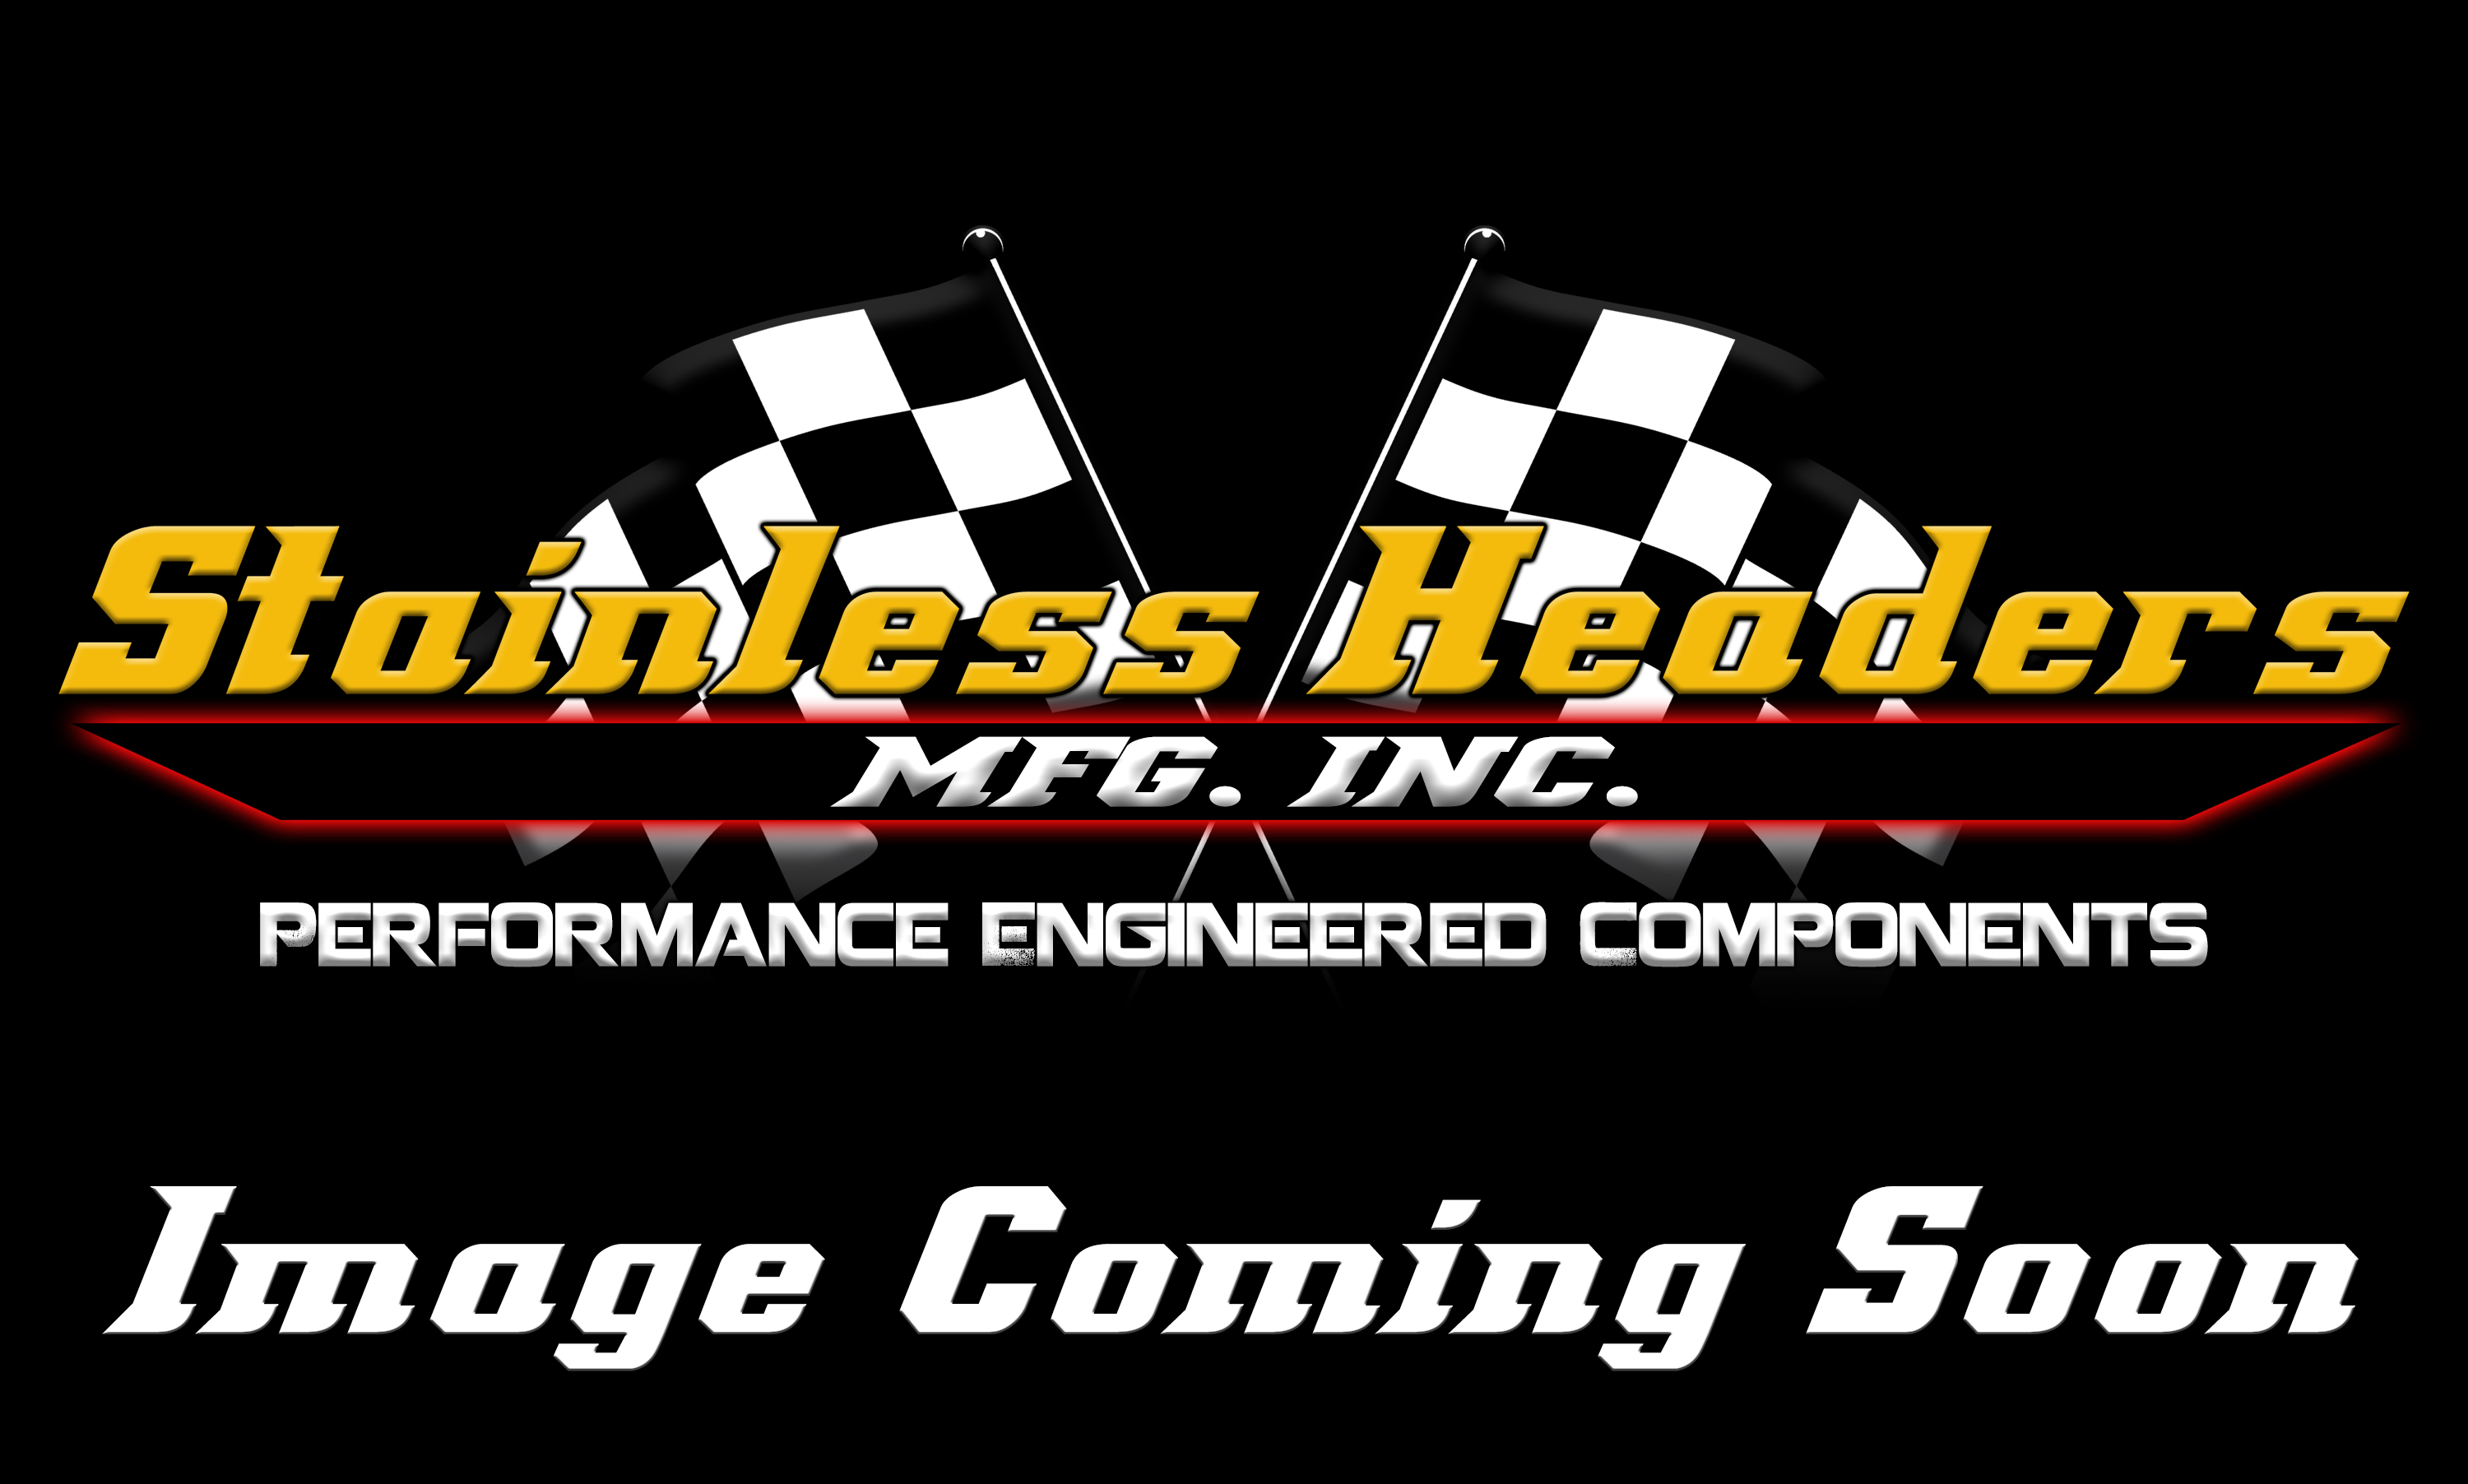 Stainless Headers - Ford 6.0L/6.4L Powerstroke Stainless Header Flange